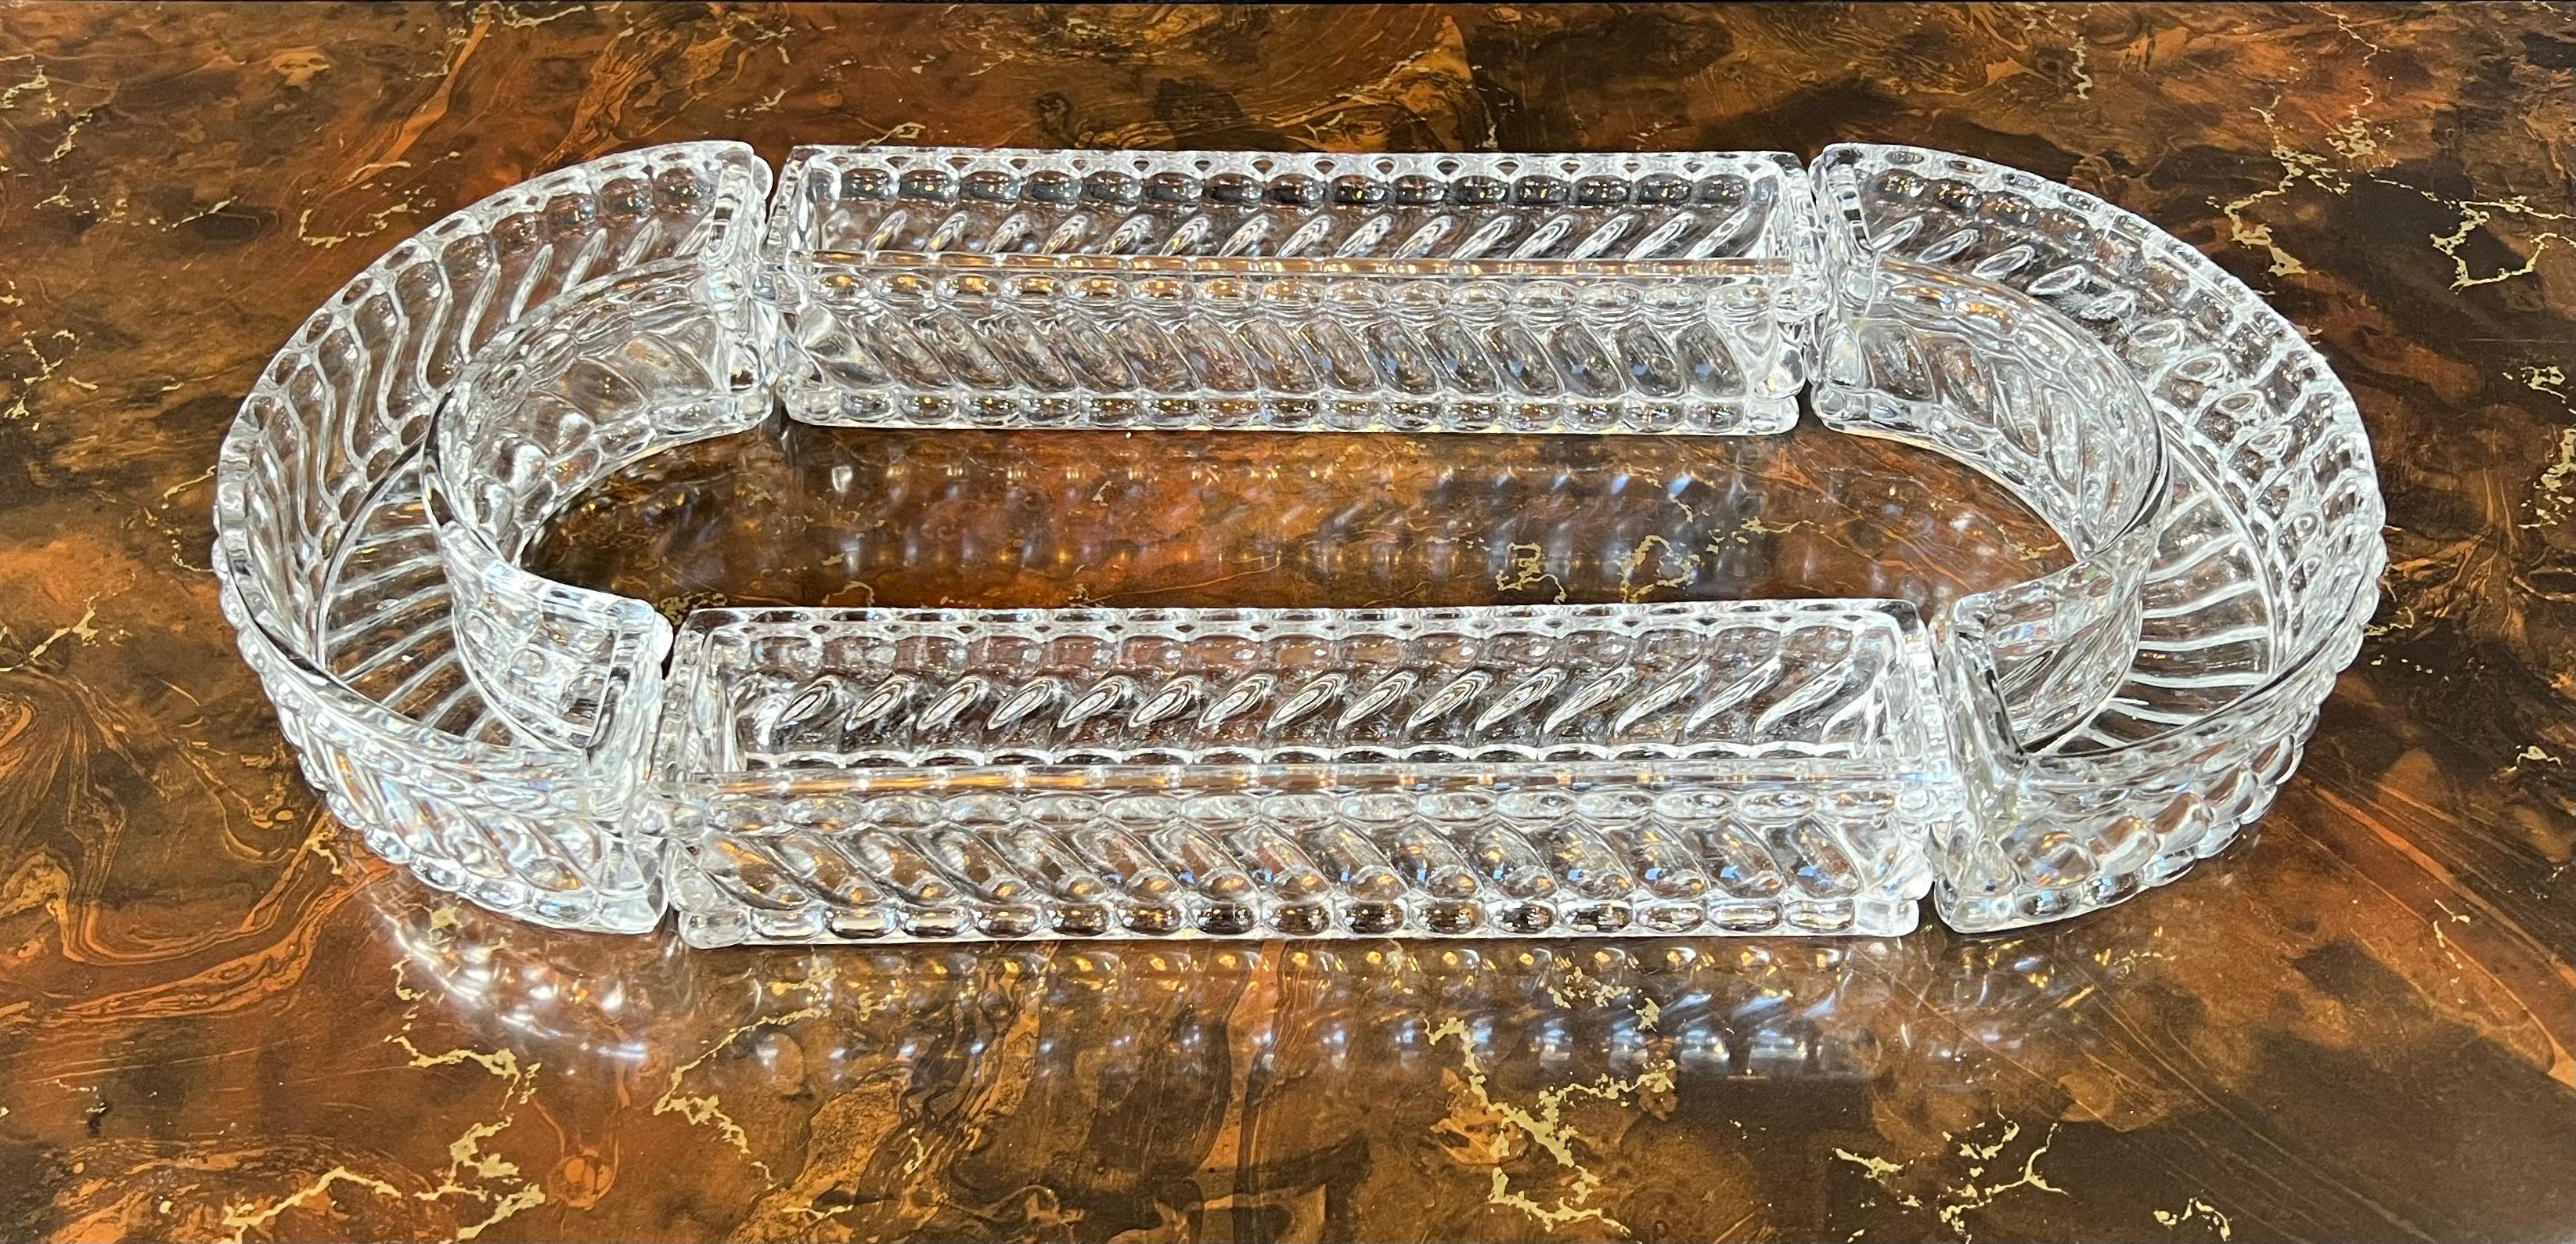 Offer here is a 1930s four piece crystal centerpiece 